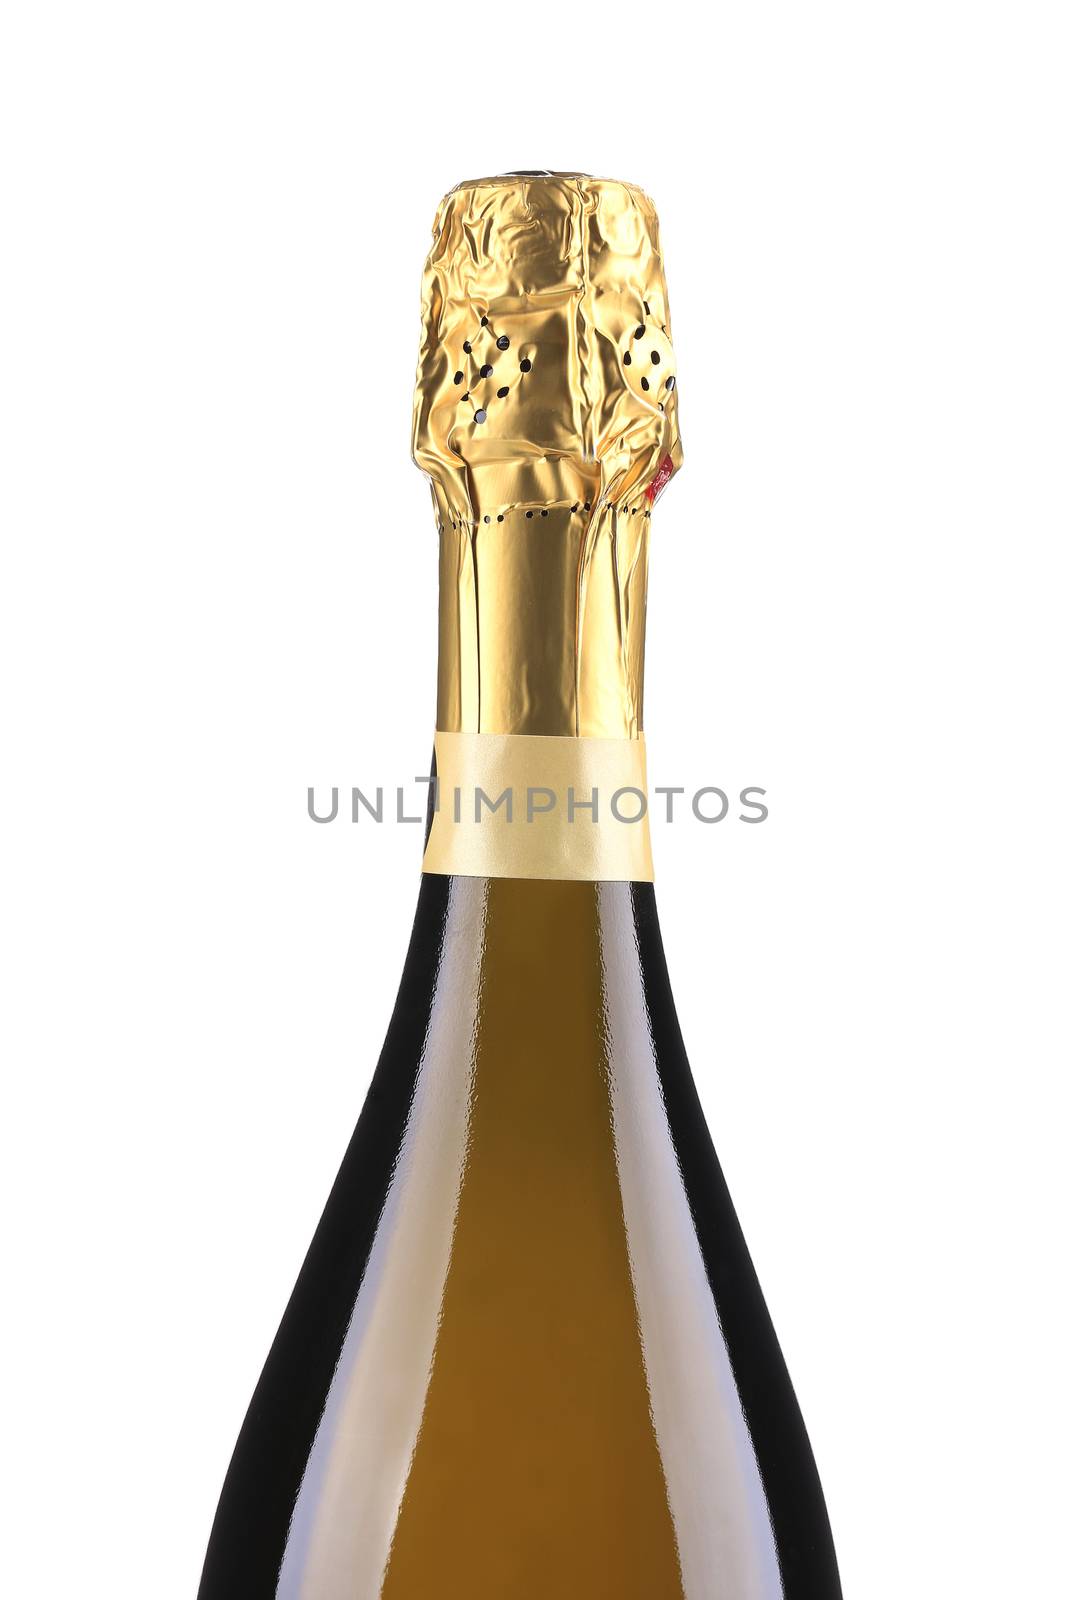 Bottle of champagne. Isolated on a white background.